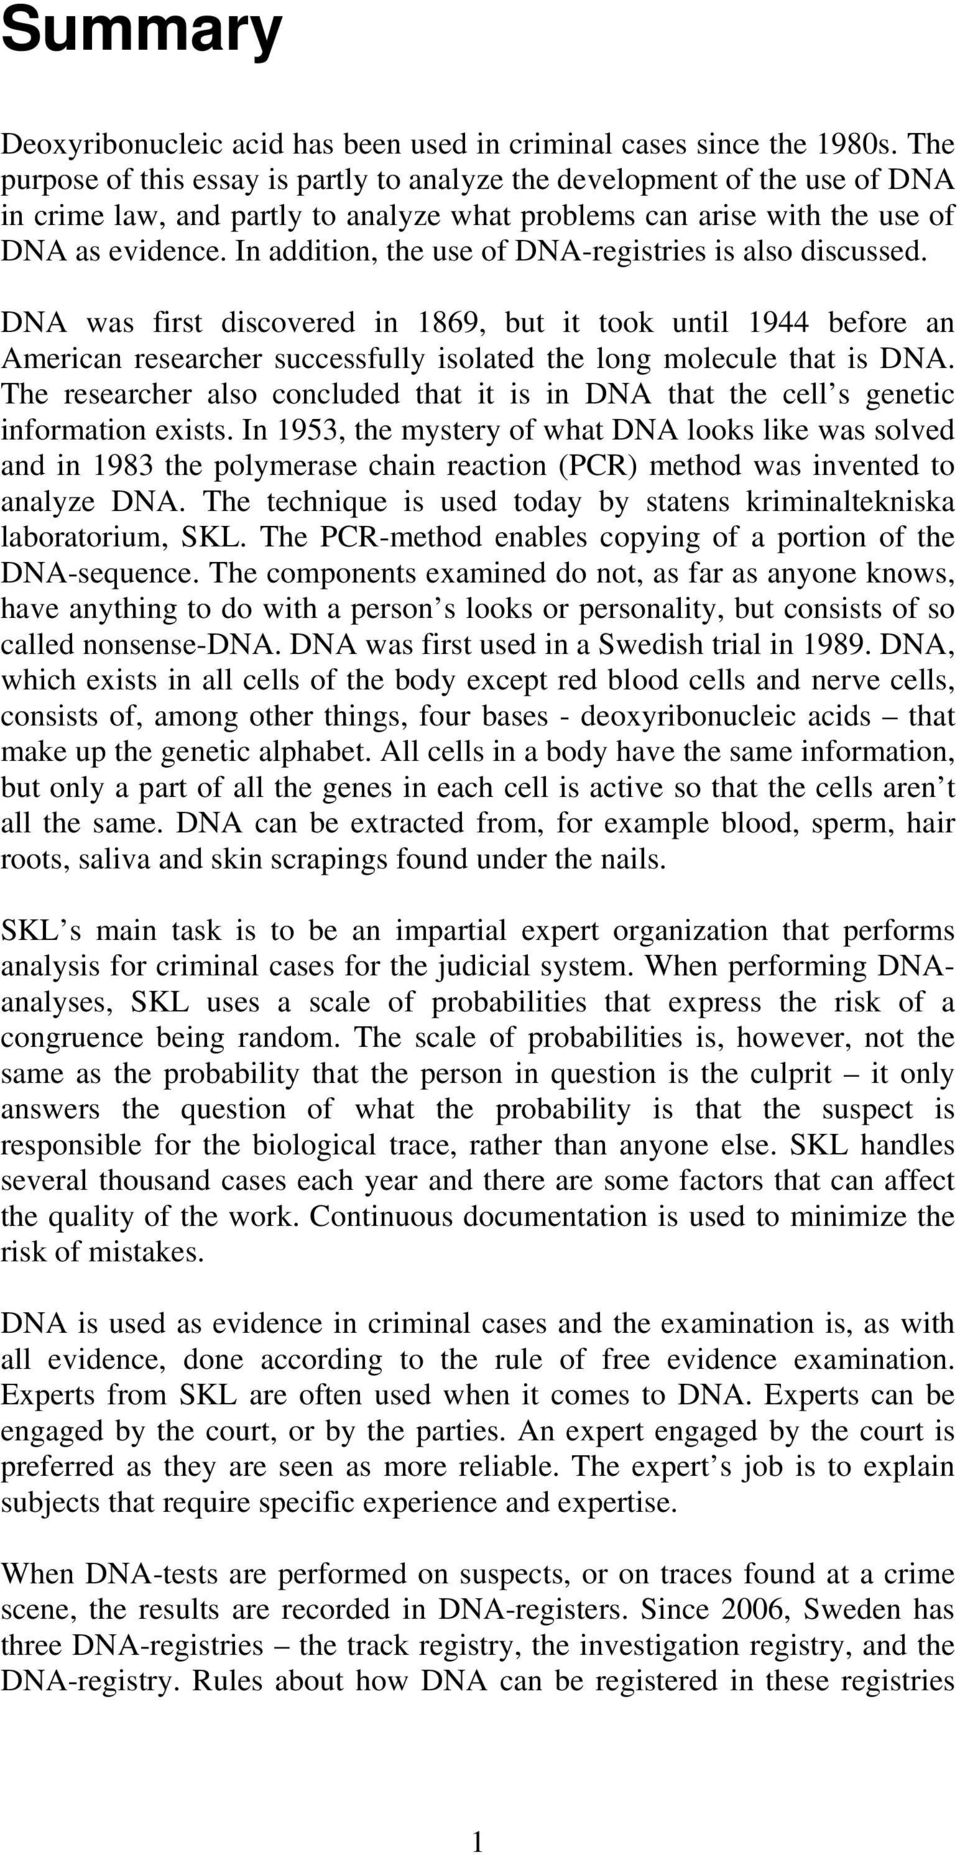 In addition, the use of DNA-registries is also discussed. DNA was first discovered in 1869, but it took until 1944 before an American researcher successfully isolated the long molecule that is DNA.